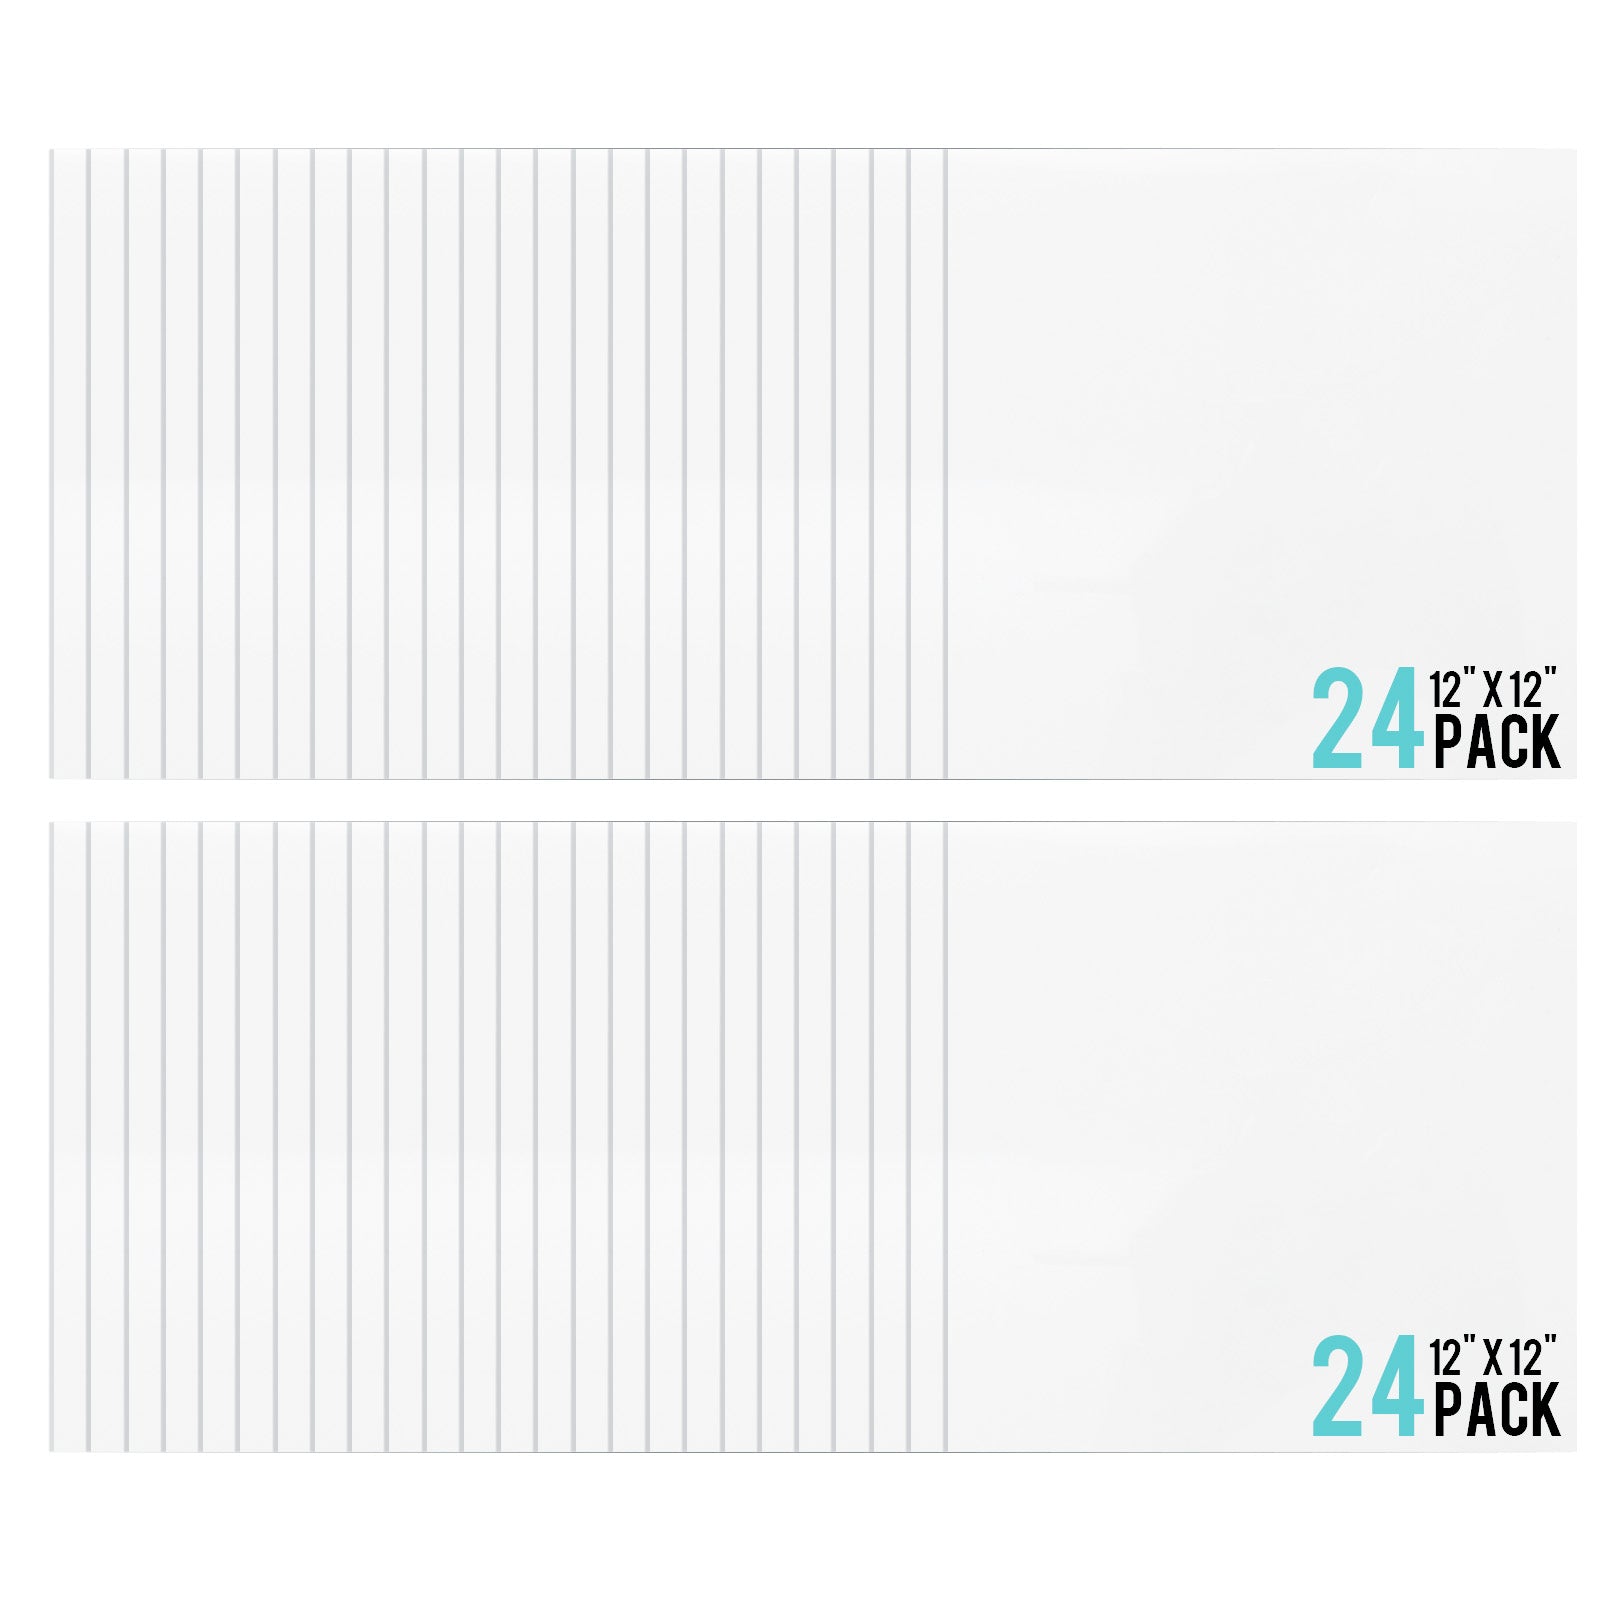 PYD Life 24 Pack Heat-Resistant Stencil Vinyl 12 x 12 White Masking Covering Film for Cricut Silhouette Cameo Machine,Stencil Vinyl for Sublimation